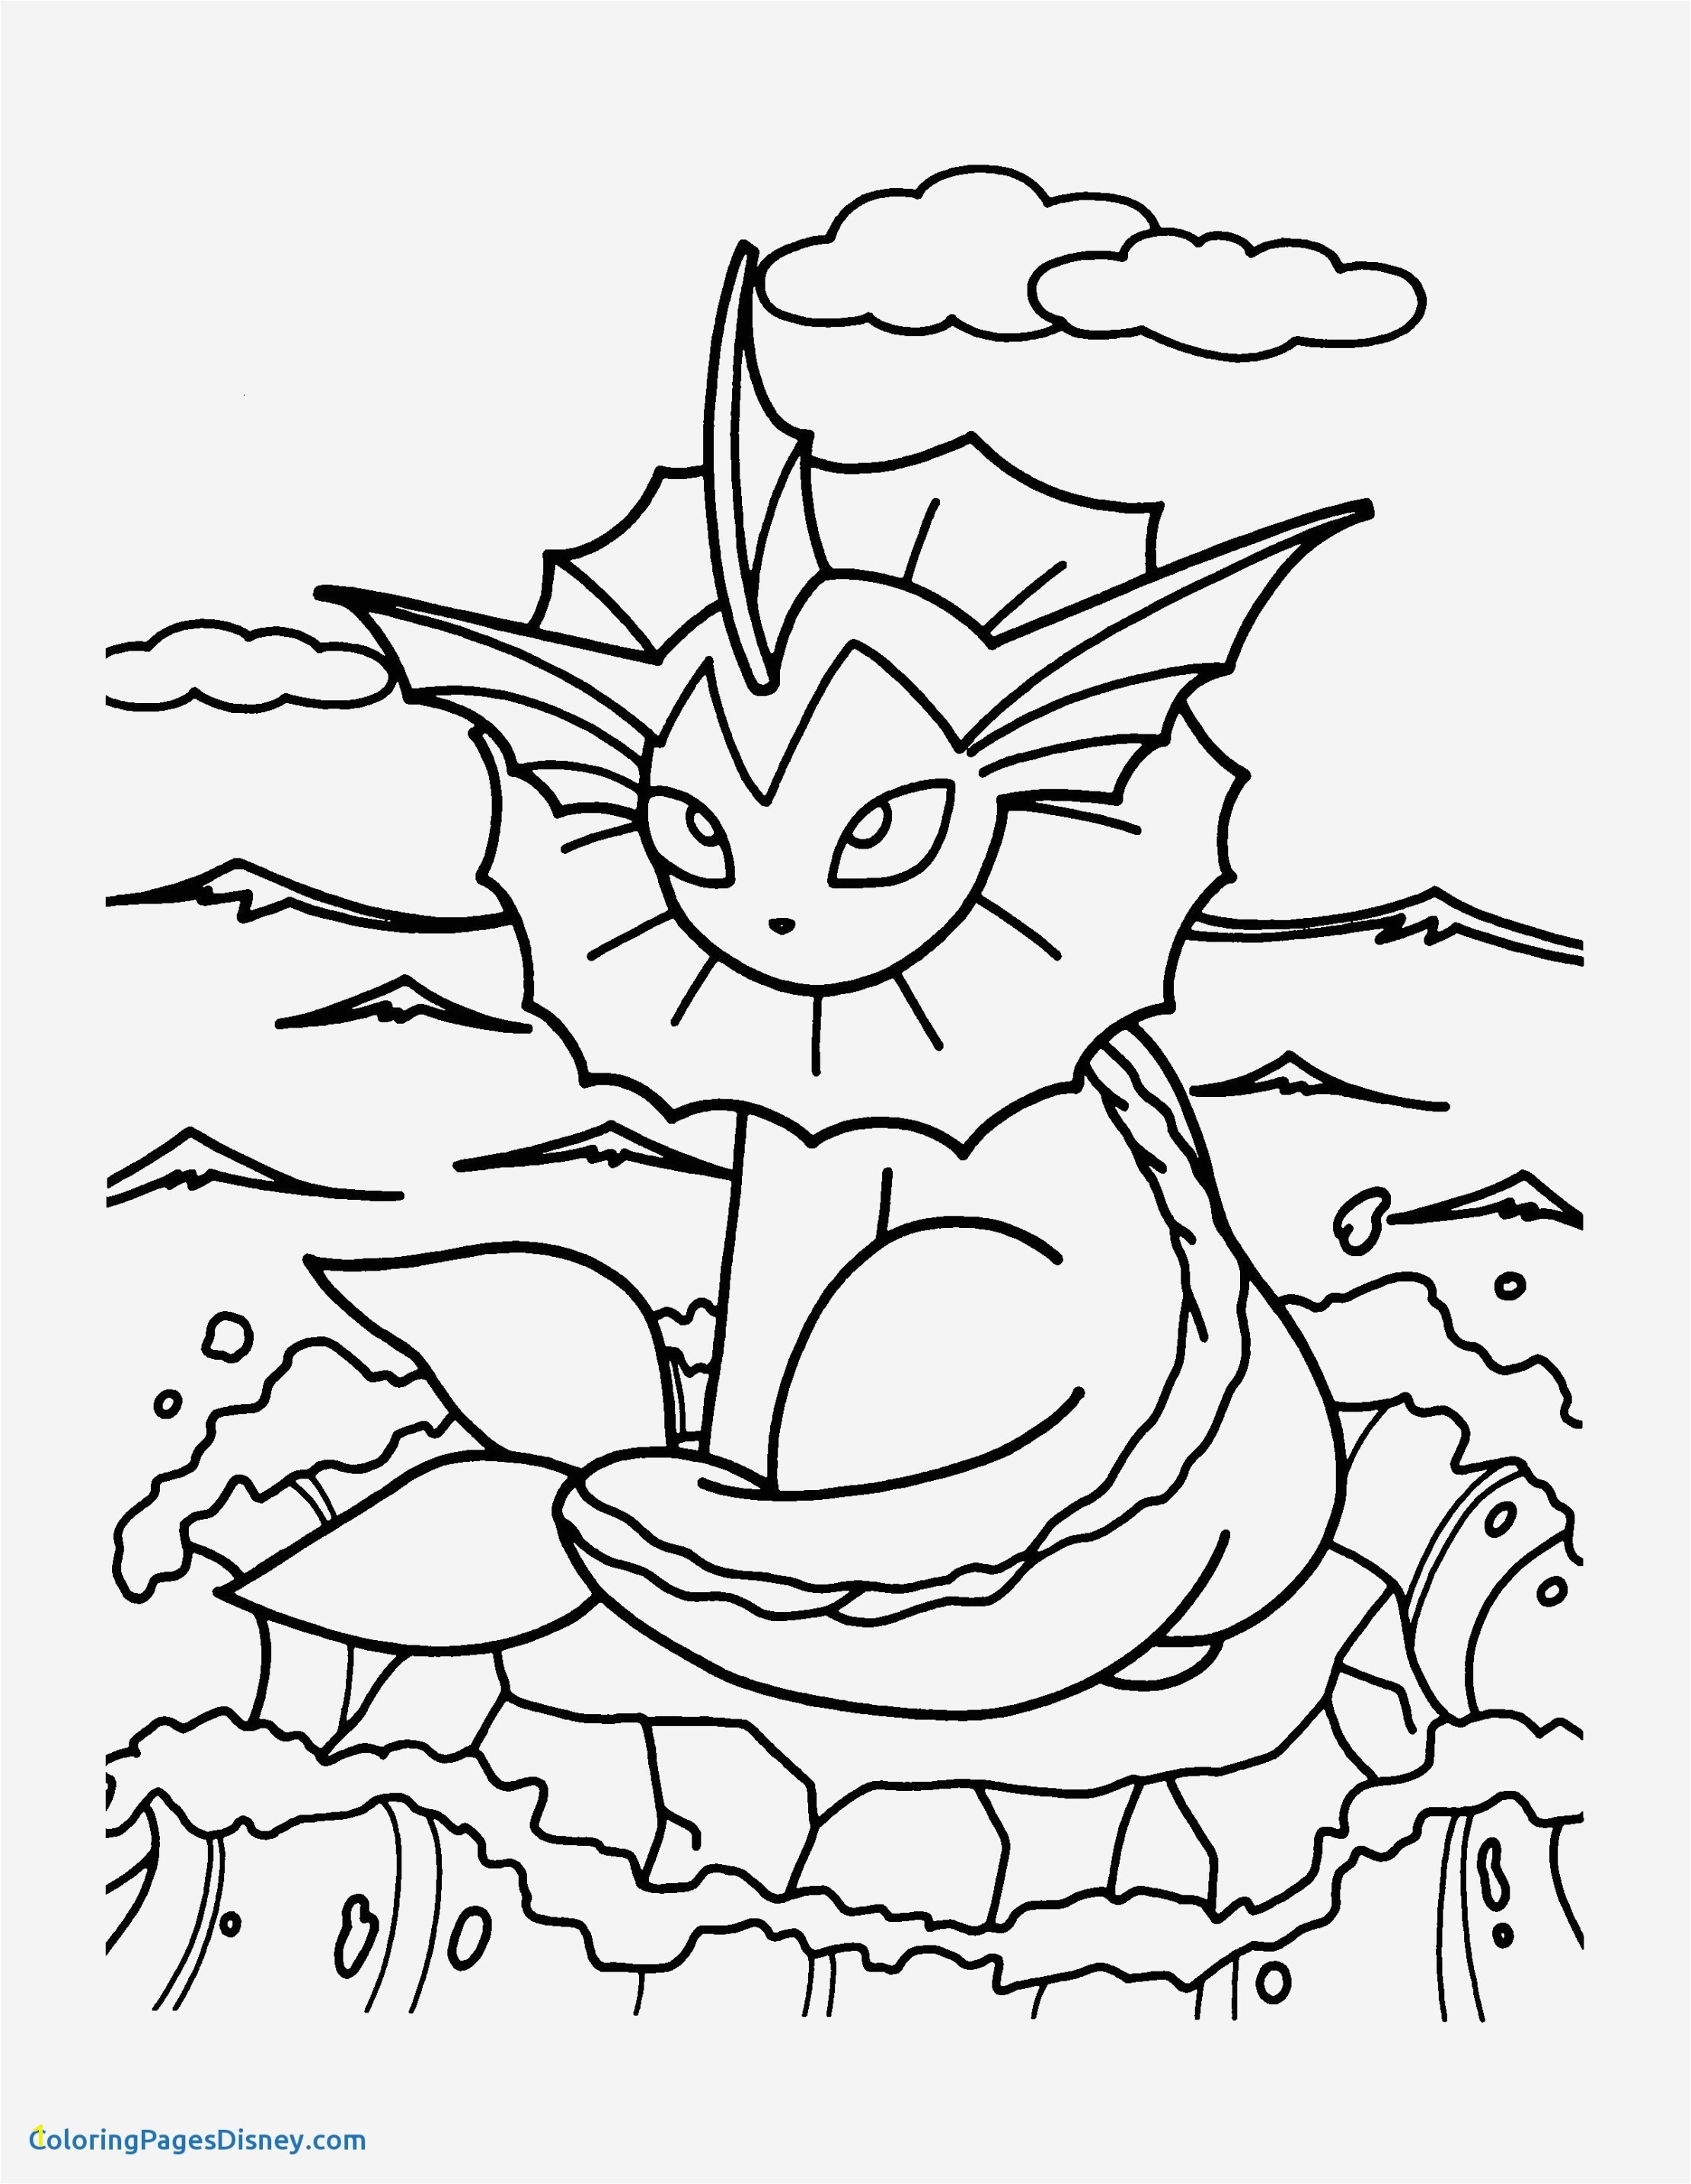 New 20 Inspirational Princess and the Frog Coloring Pages – Coloring